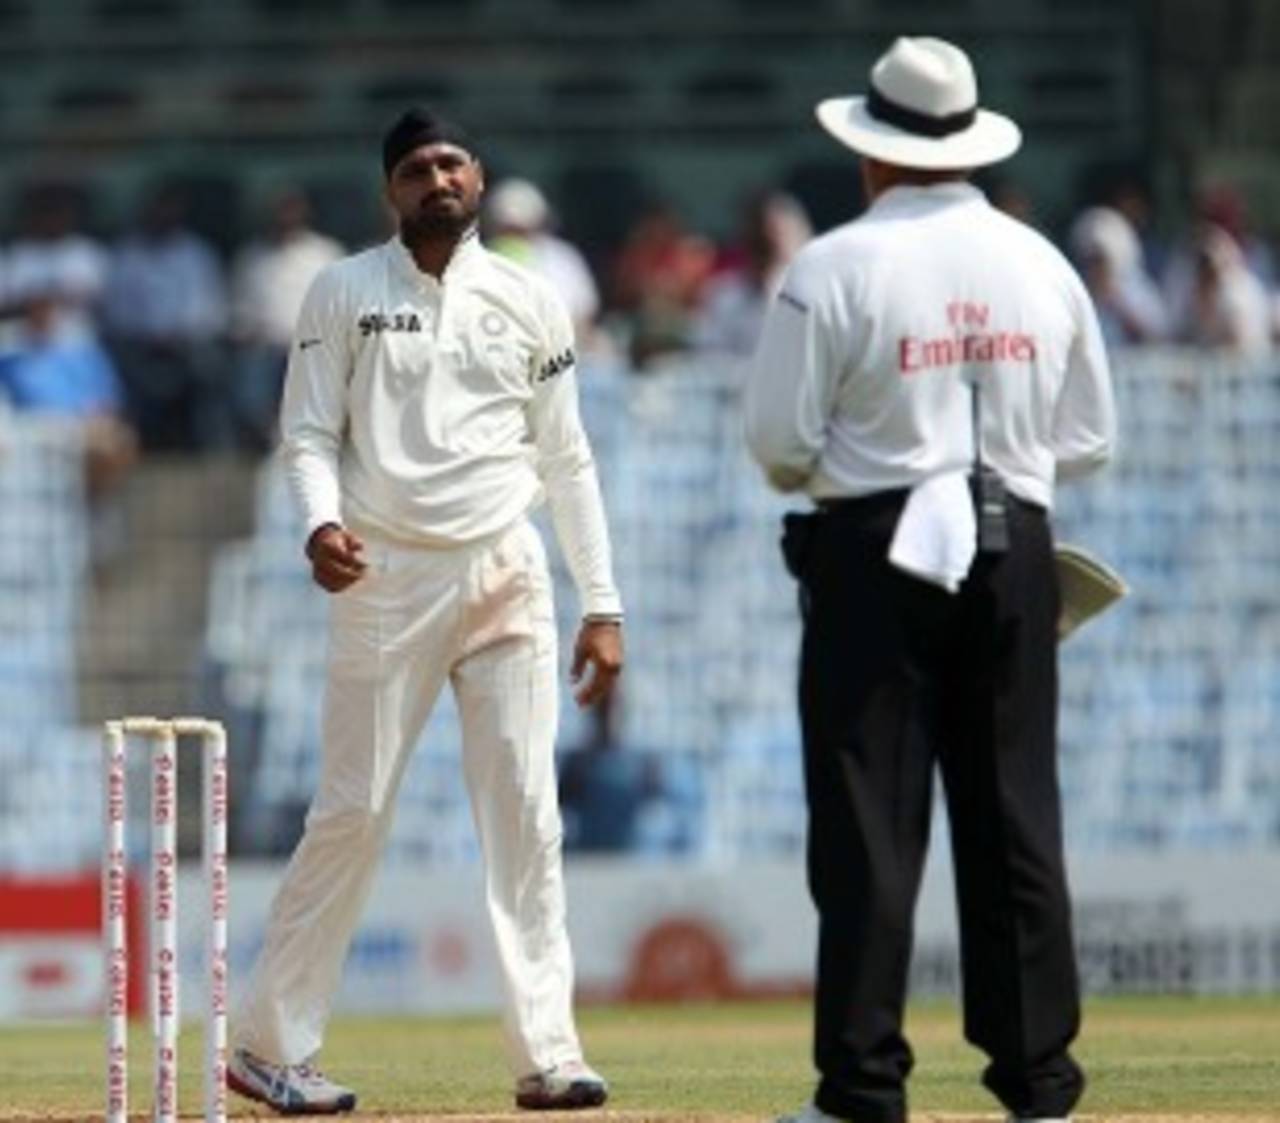 Harbhajan Singh went wicketless on the first day of his 100th Test, India v Australia, 1st Test, Chennai, 1st day, February 22, 2013